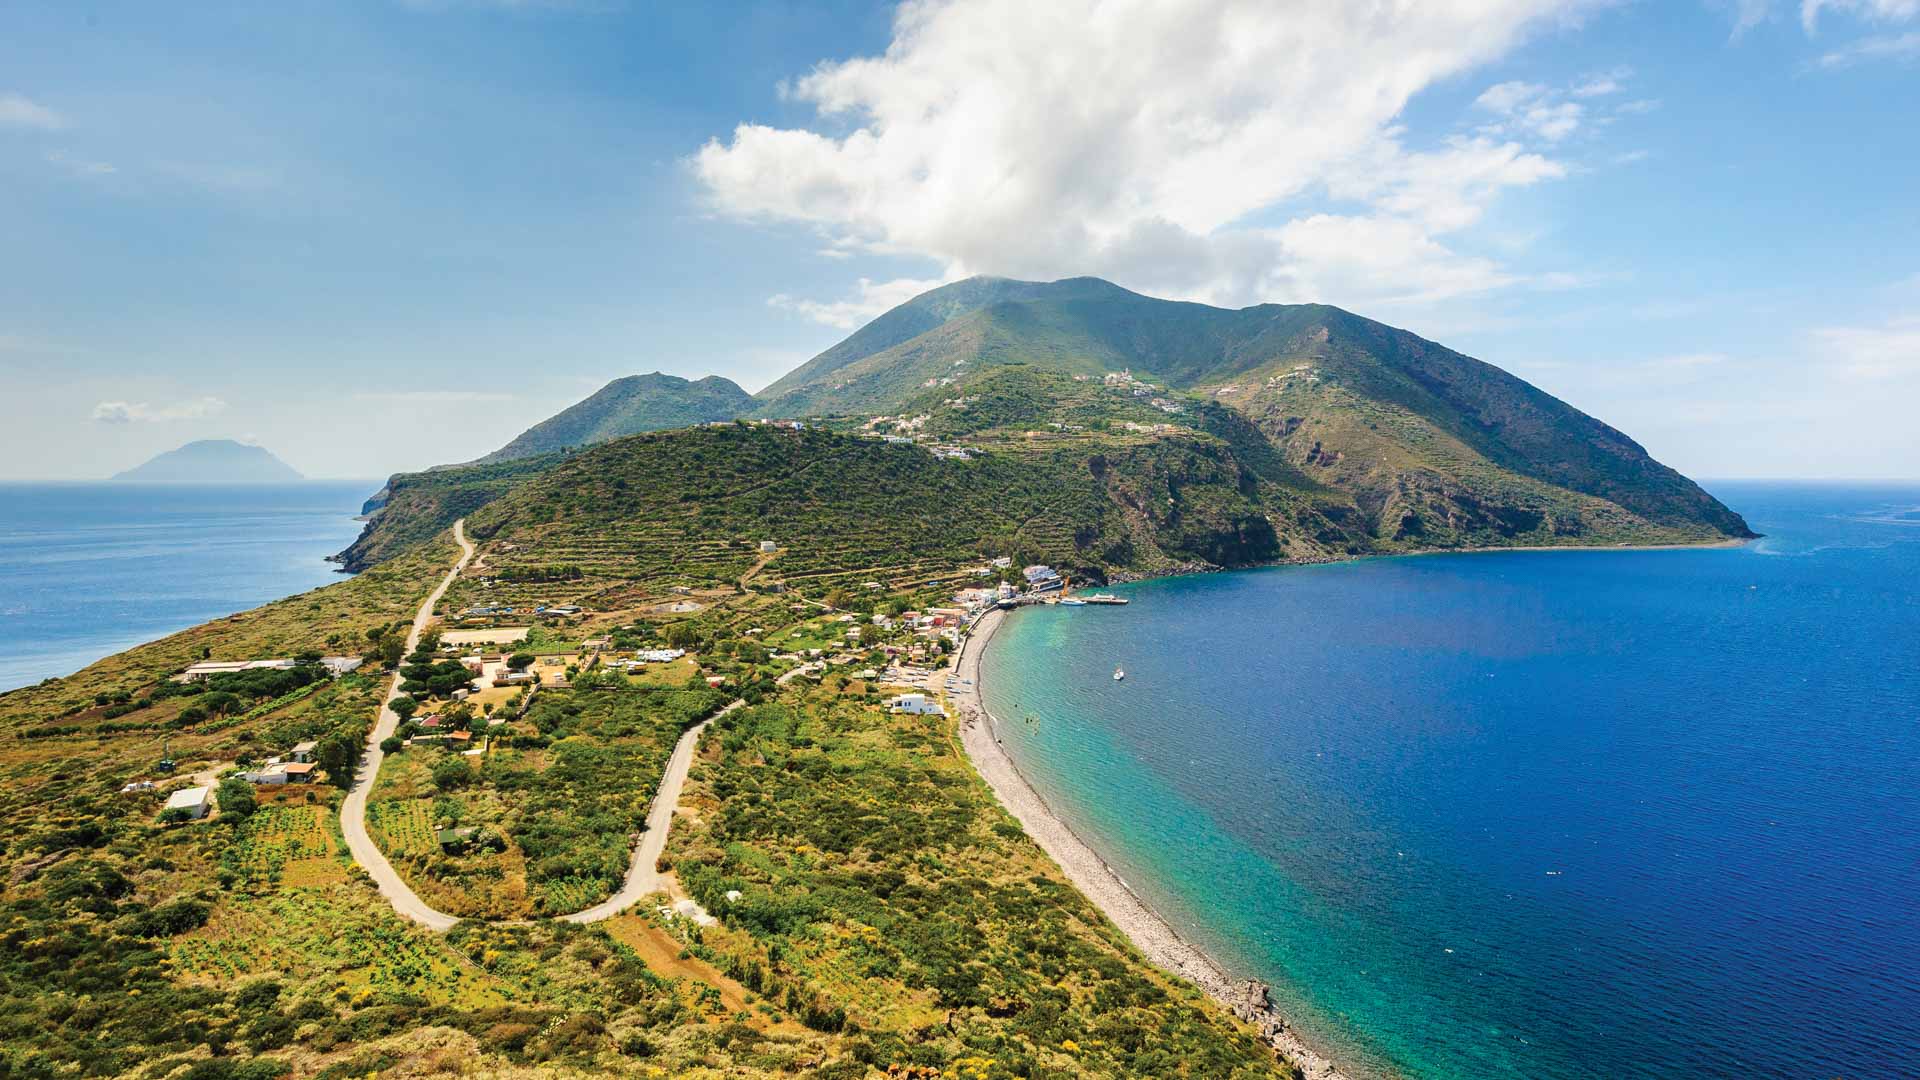 A rugged green stretch of island dotted with homes intersects an expanse of blue Mediterranean sea.